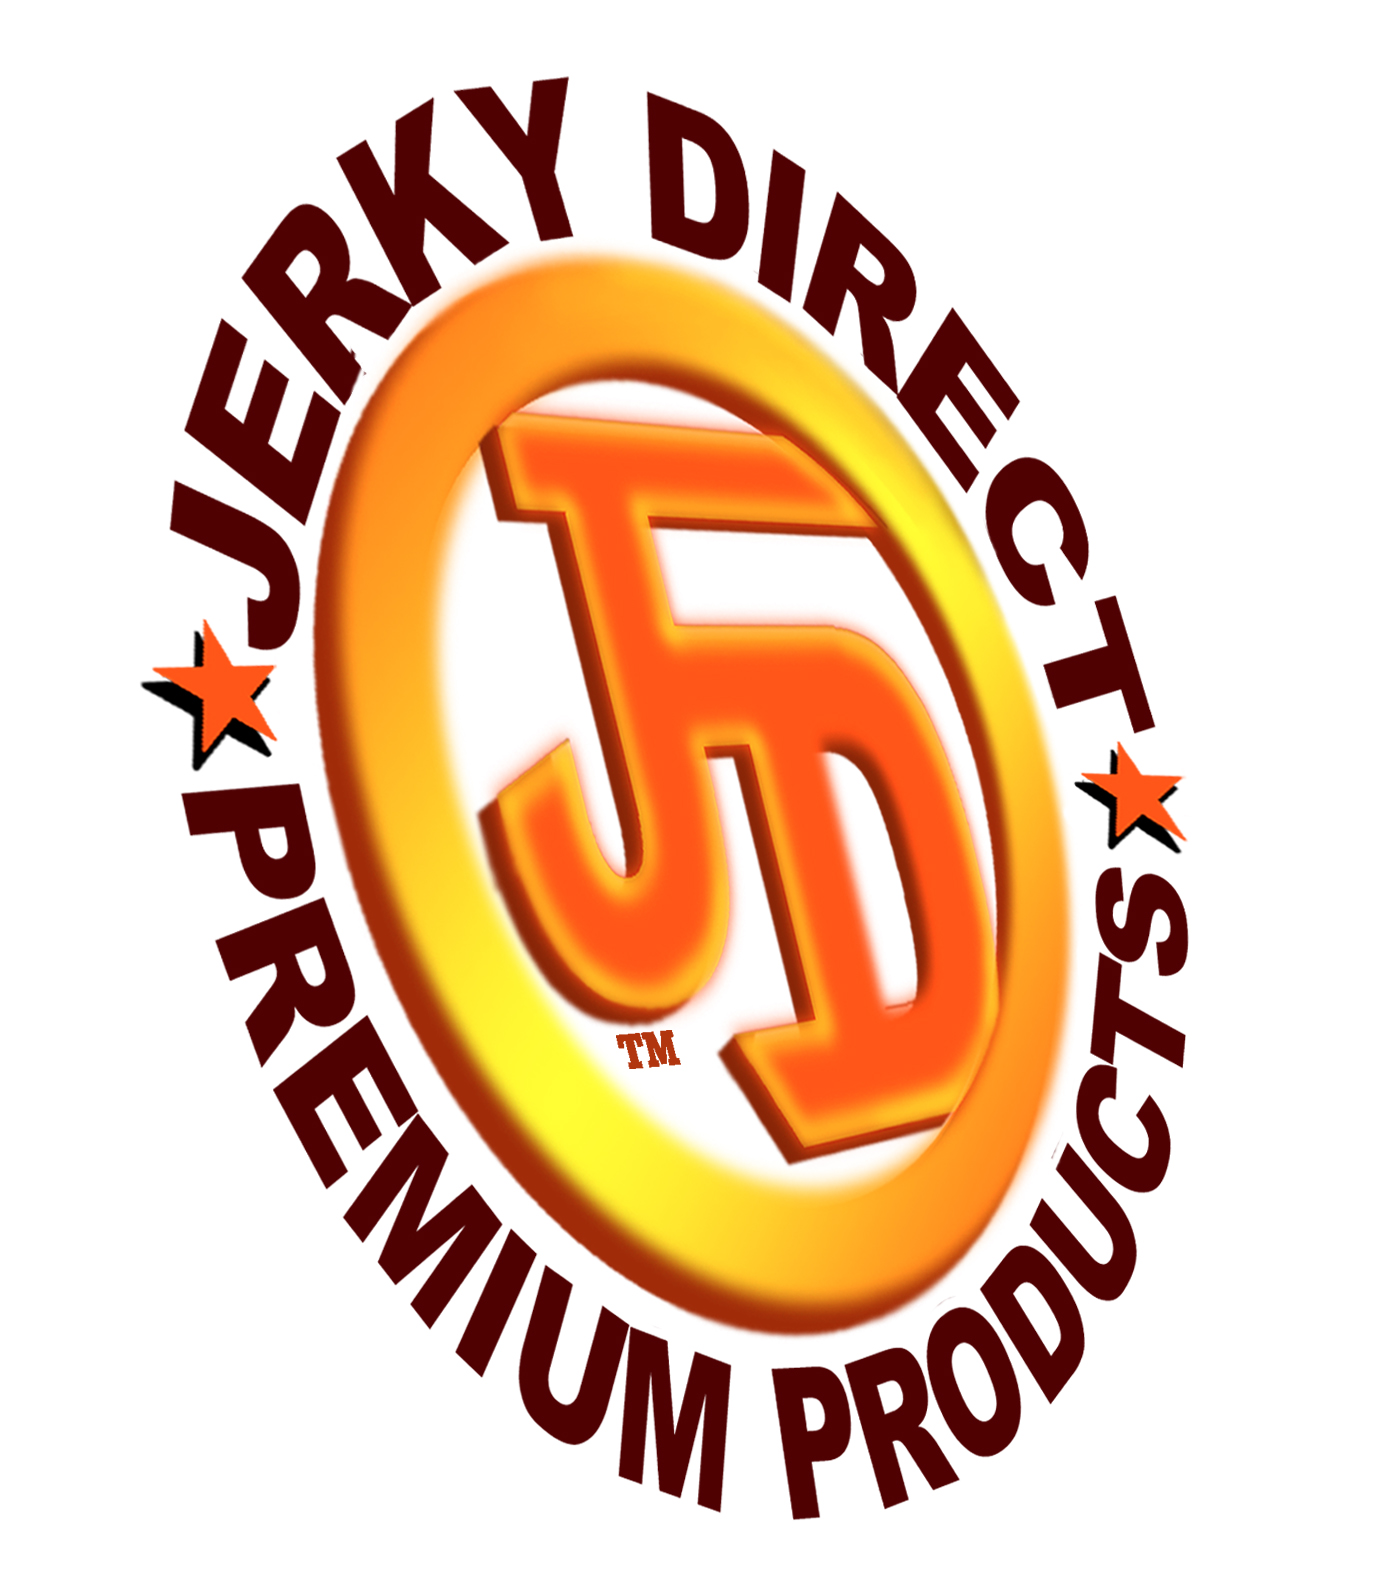 Click here for natural American made jerky products including pet jerky.